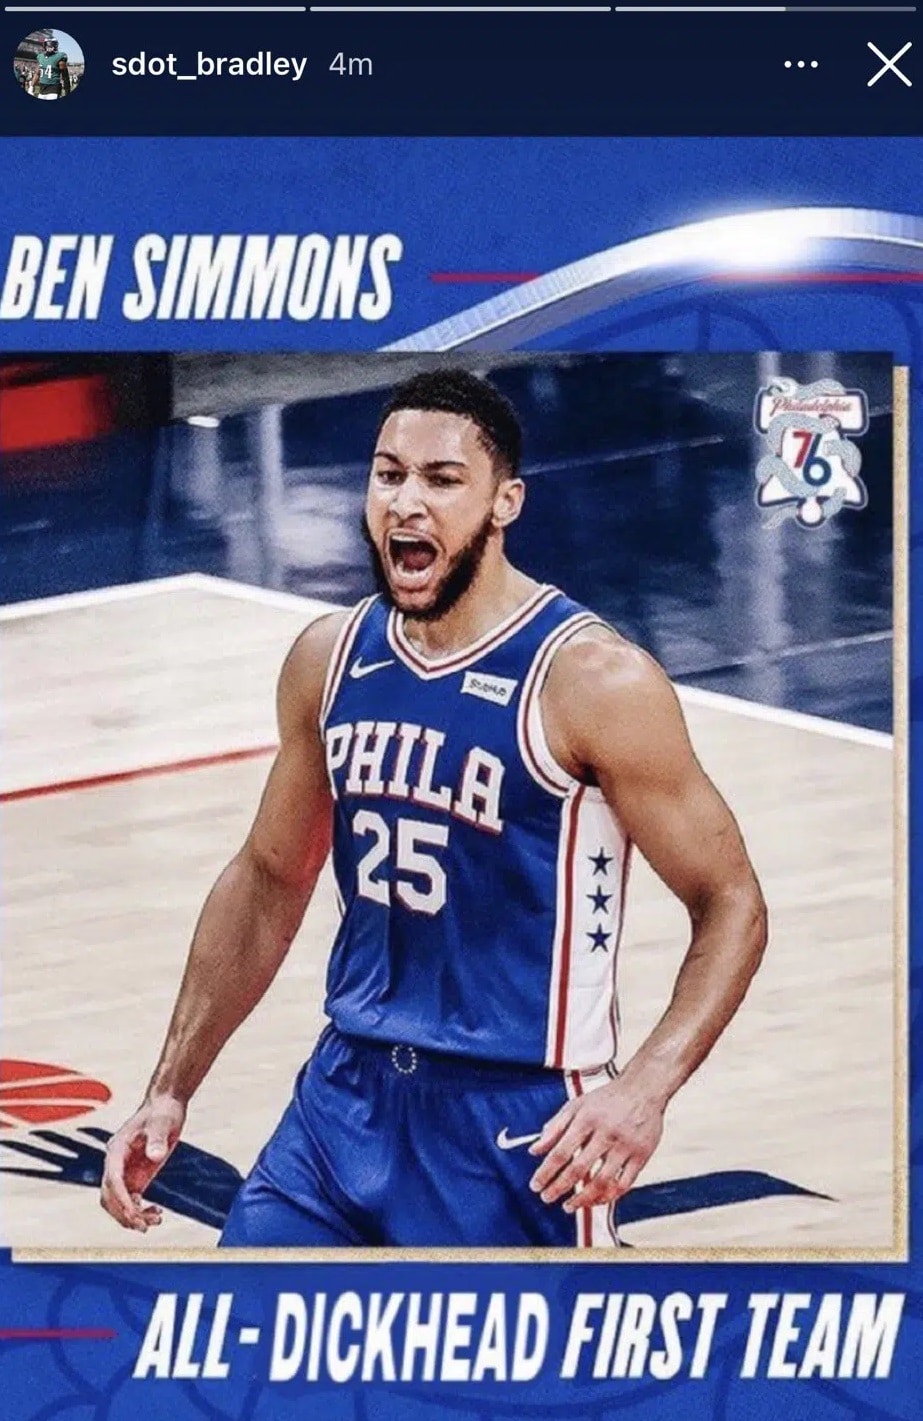 Eagles Linebacker Puts Ben Simmons on the “All-Dickhead First Team”